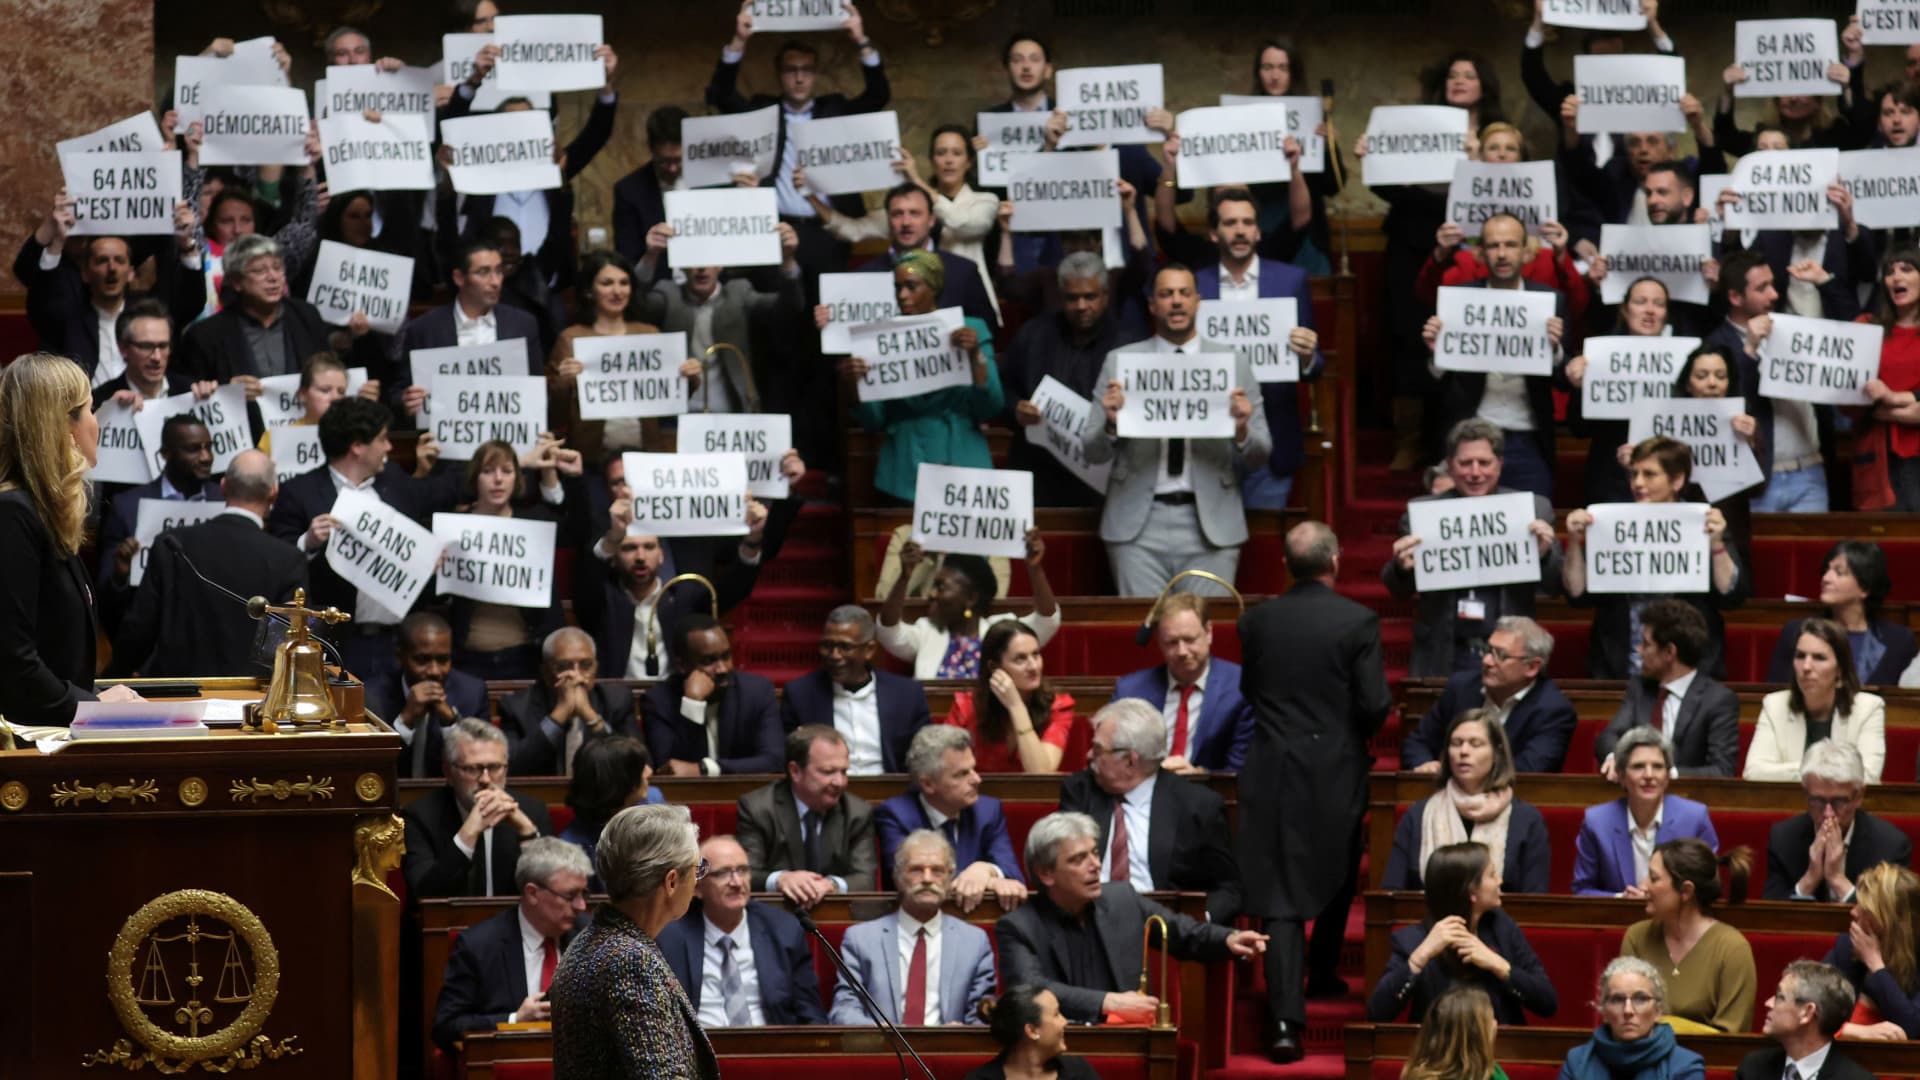 Members of parliament of the left hold placards and sing the Marseillaise, French national anthem,as French Prime Minister Elisabeth Borne arrives to deliver a speech on pensions reform bill at the National Assembly in Paris, France, March 16, 2023. 